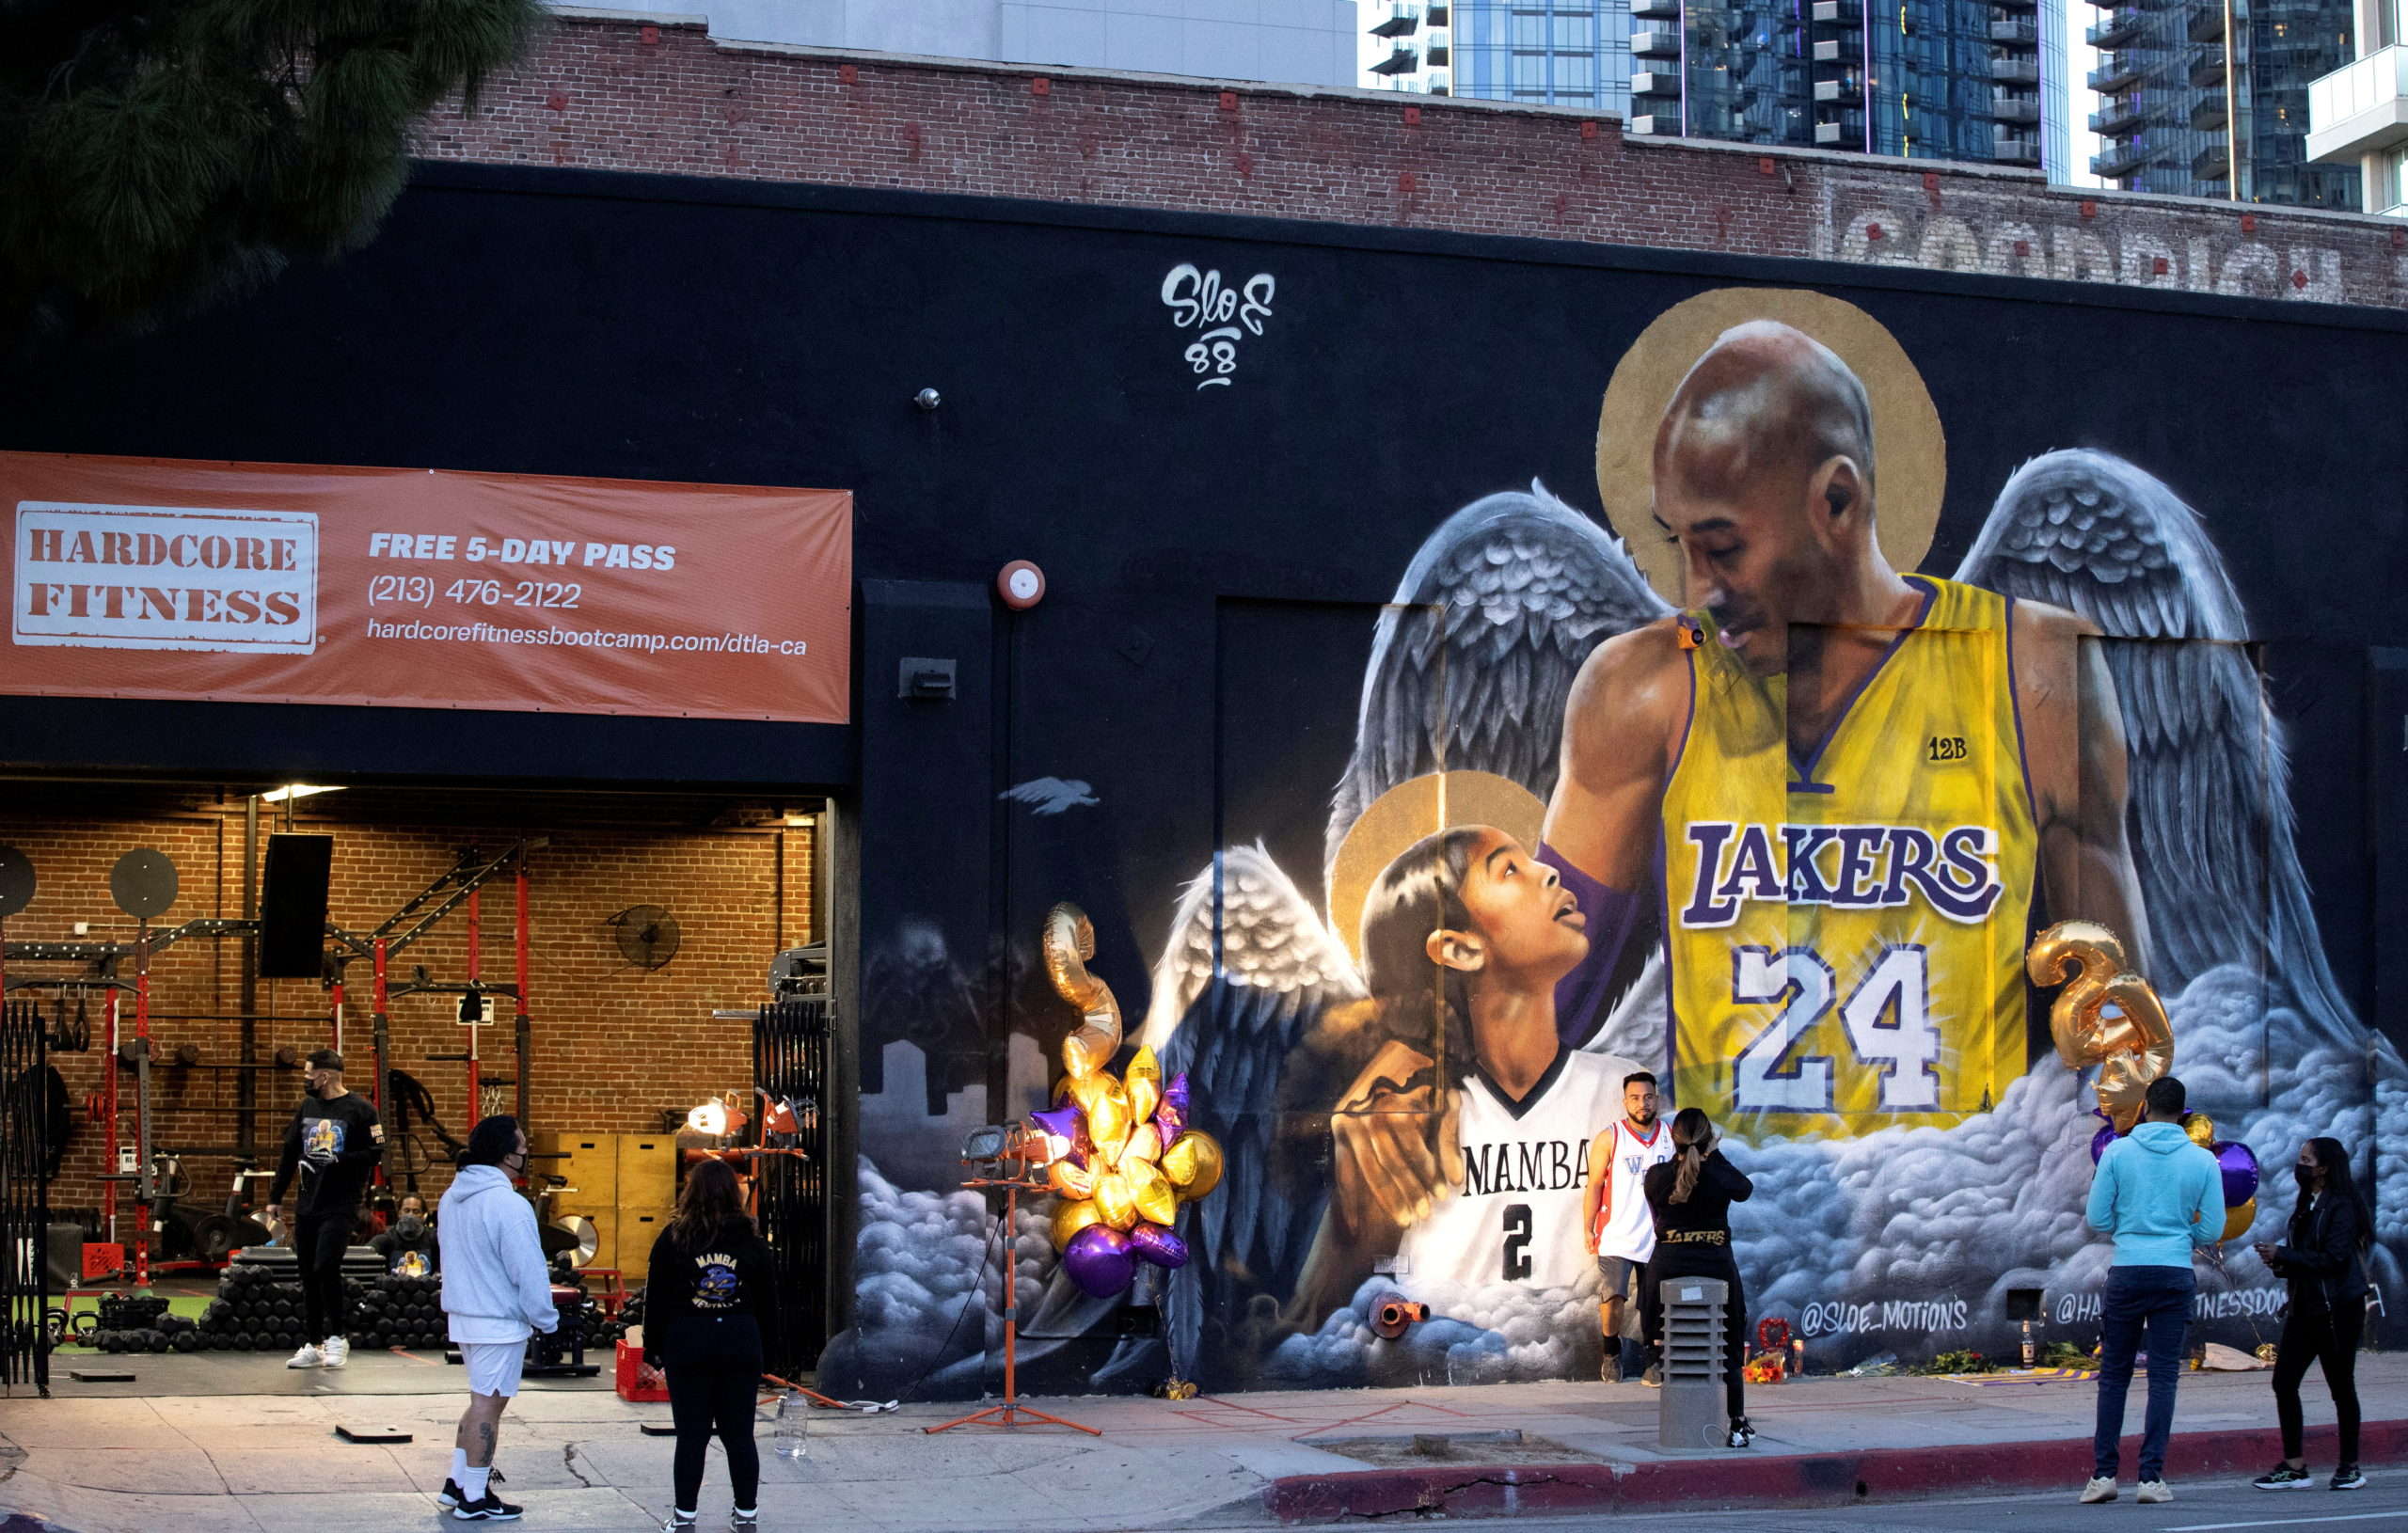 People stop by a mural of late Kobe Bryant, who perished one year ago alongside his daughter and seven others when their helicopter crashed into a hillside, in Los Angeles